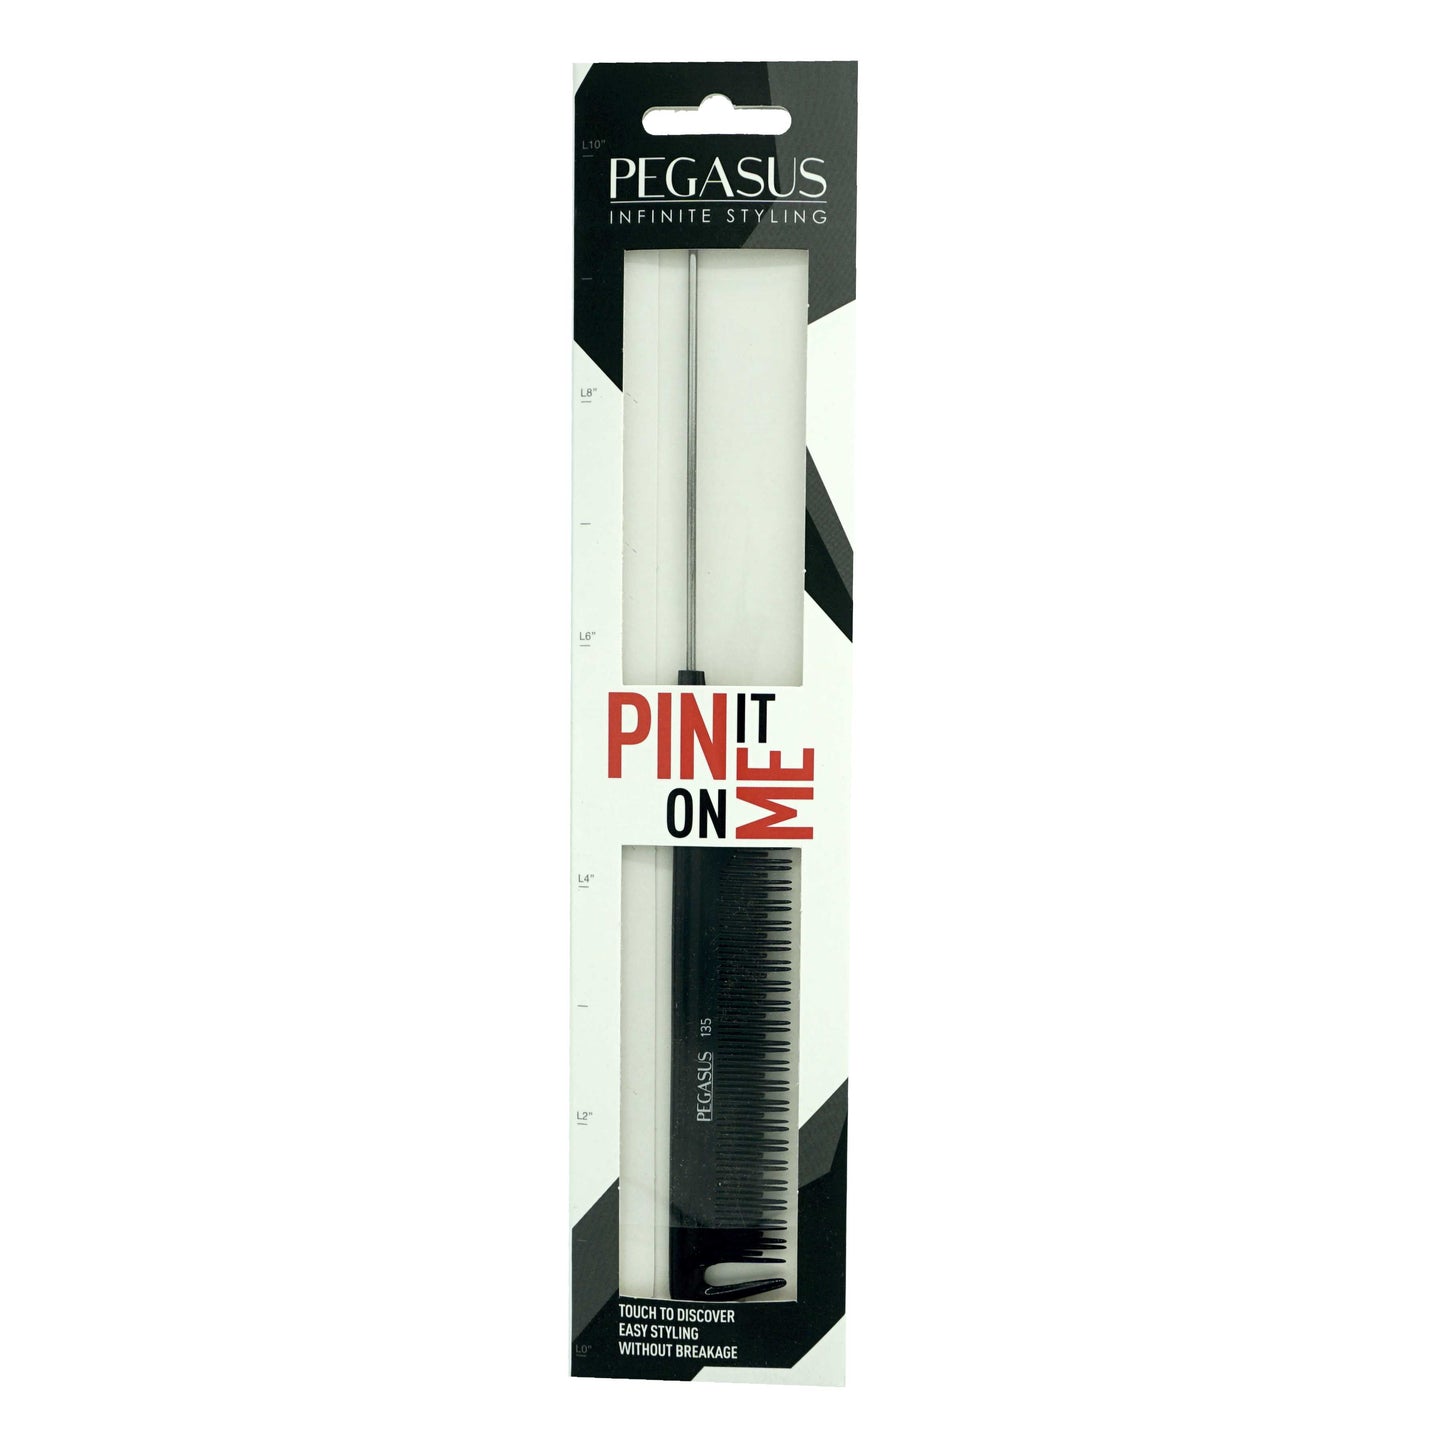 Pegasus 135, 9.5in Hard Rubber Pintail Tease Comb with Sectioning, Anti Static, Heat and Chemically Resistant, Stainless Steel Pin, Great for Parting, Coloring Hair | Peines de goma dura - Black